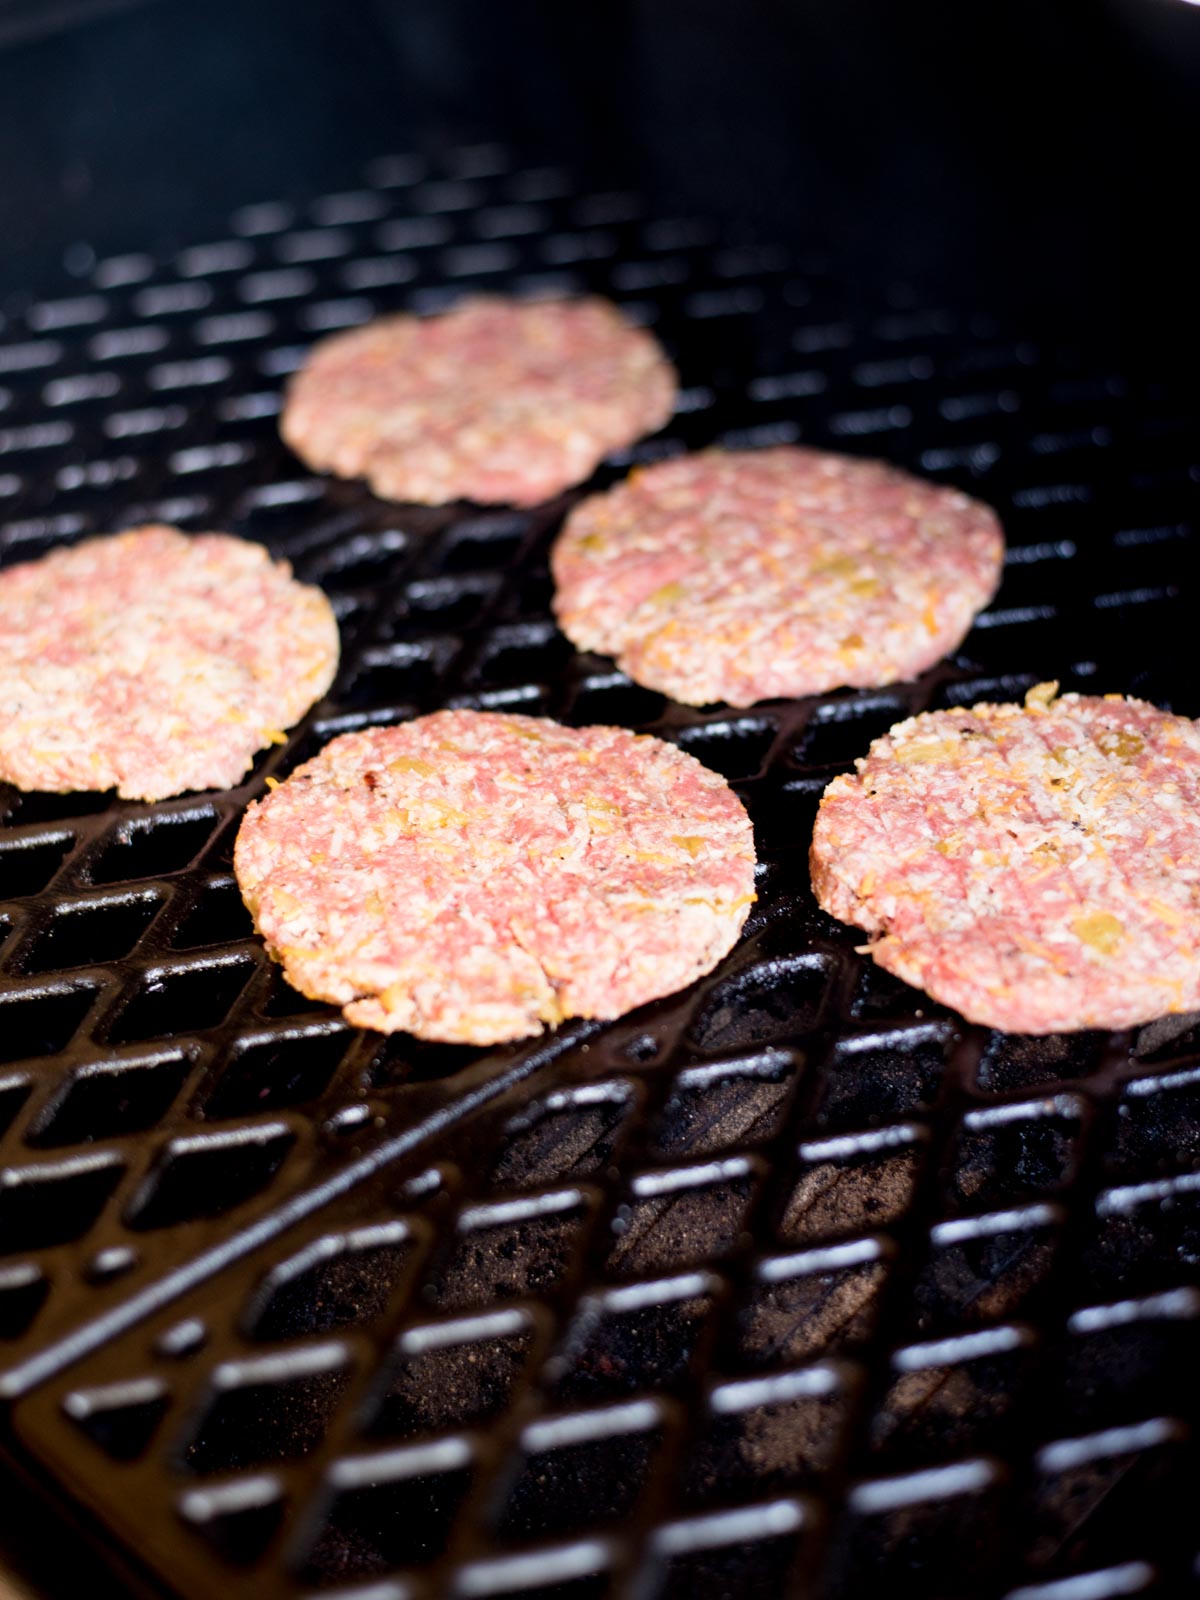 raw burgers on an electric smoker grate